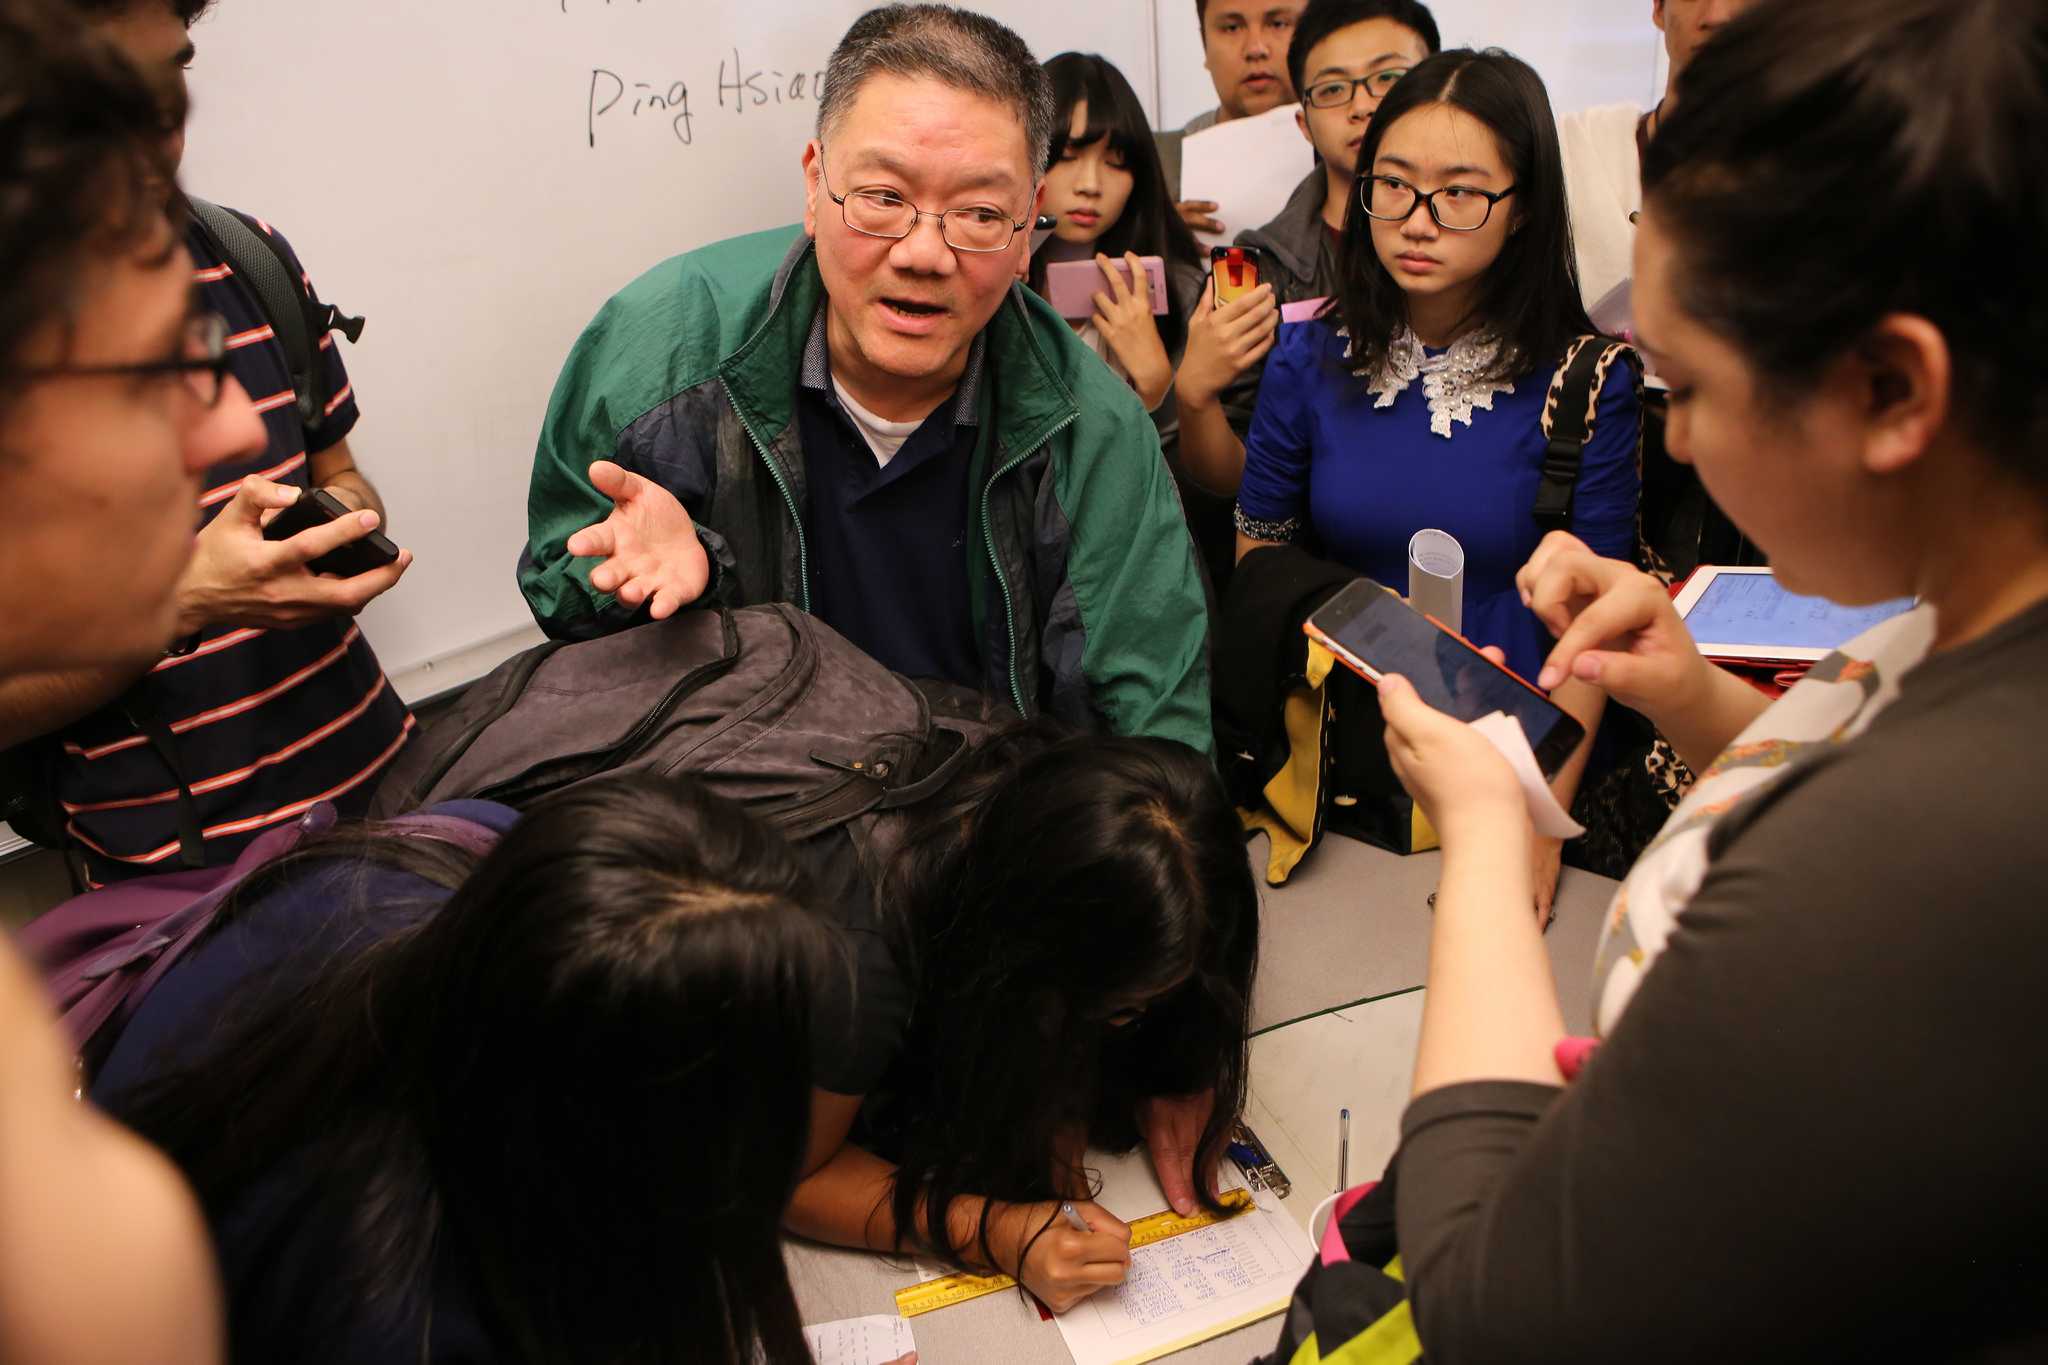 Finance Department Chair Ping Hsiao takes down the names of students with prerequisites who were waiting to be added to a new Finance 350 section in the Business building at San Francisco State University on Thursday August 27, 2015. (Joel Angel Juárez /  Xpress)